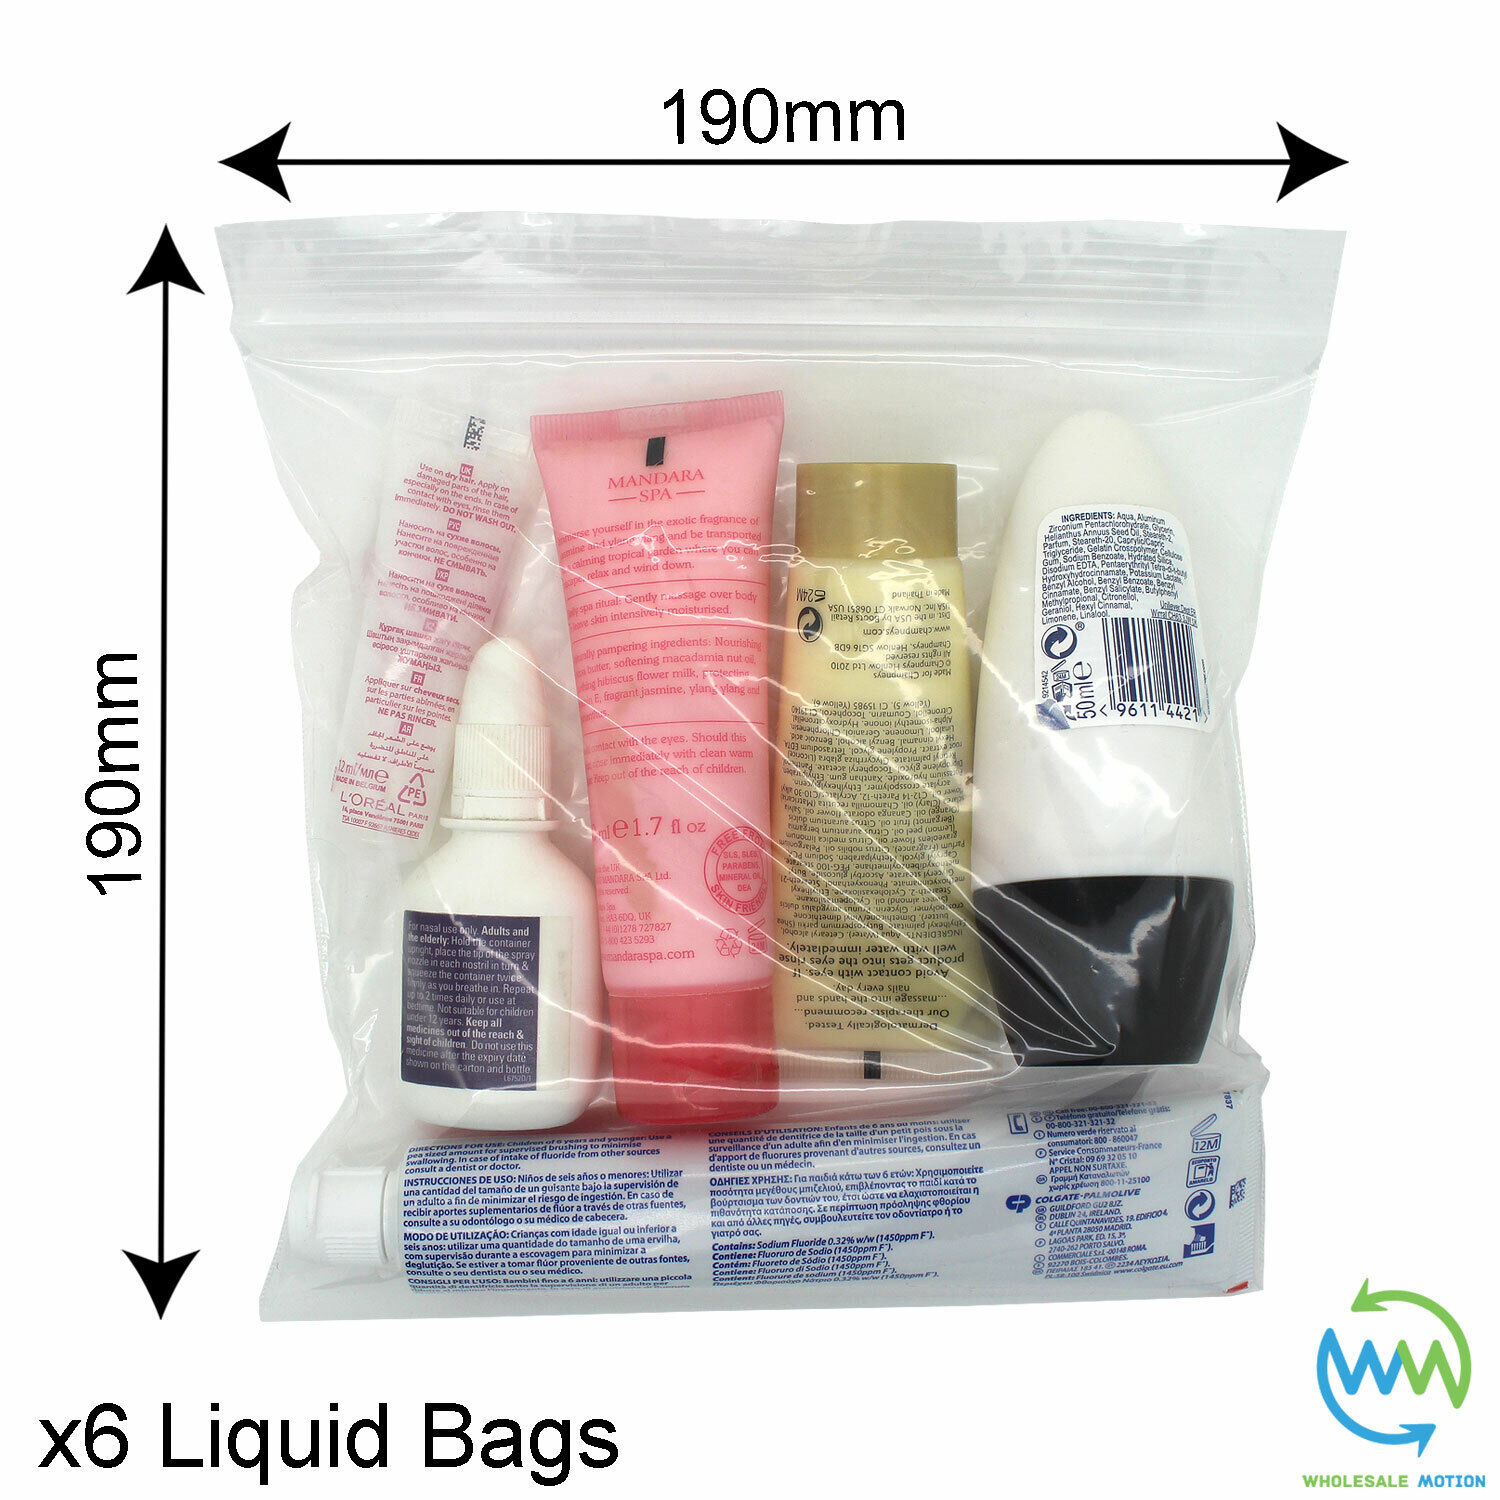 6 x Clear AIRPORT SECURITY LIQUID BAGS Plastic Seal HOLIDAY Travel HAND LUGGAGE